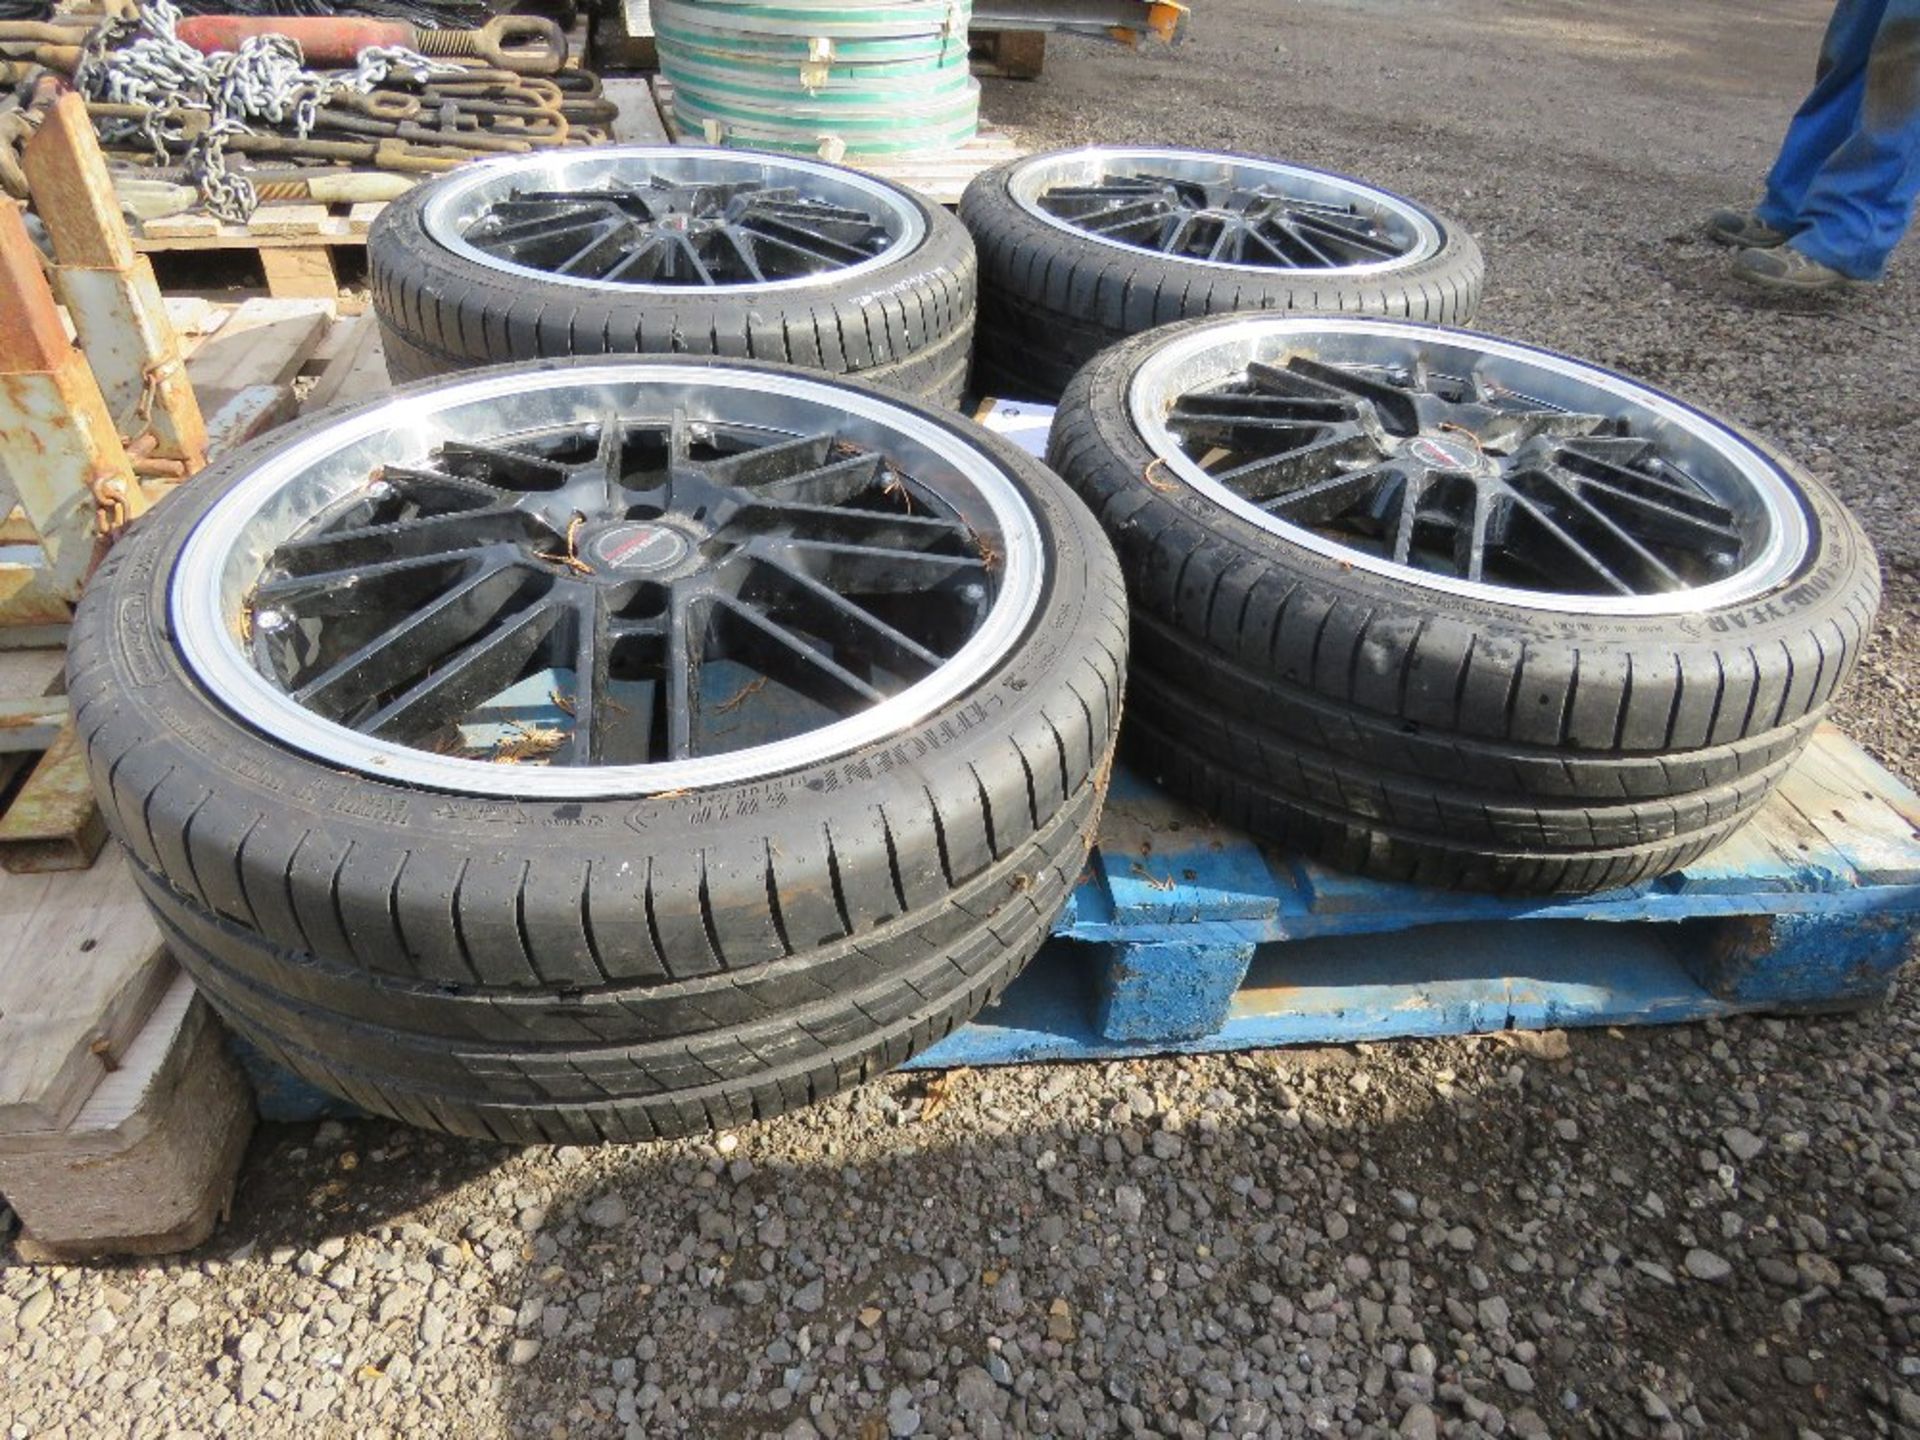 SET OF 4 195-40R17 ALLOY WHEELS AND TYRES WITH NUTS, SUITABLE FOR FIESTA?? THIS LOT IS SOLD UNDE - Image 3 of 4